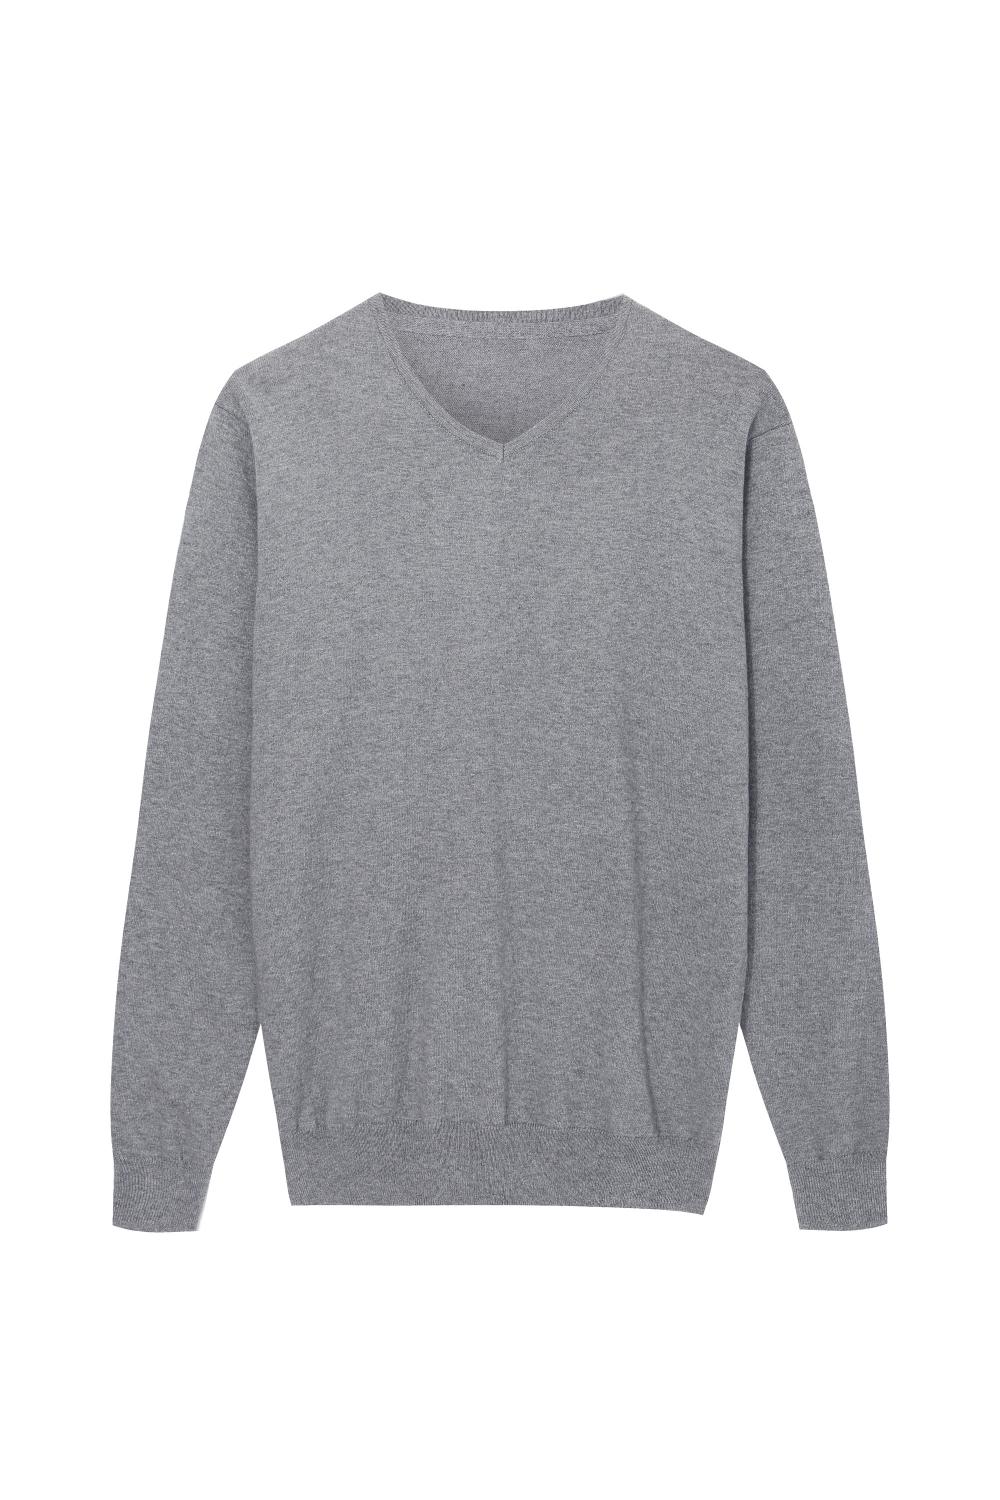 Men's Knitted Sustainable Recycle Polyester V-Neck Pullover